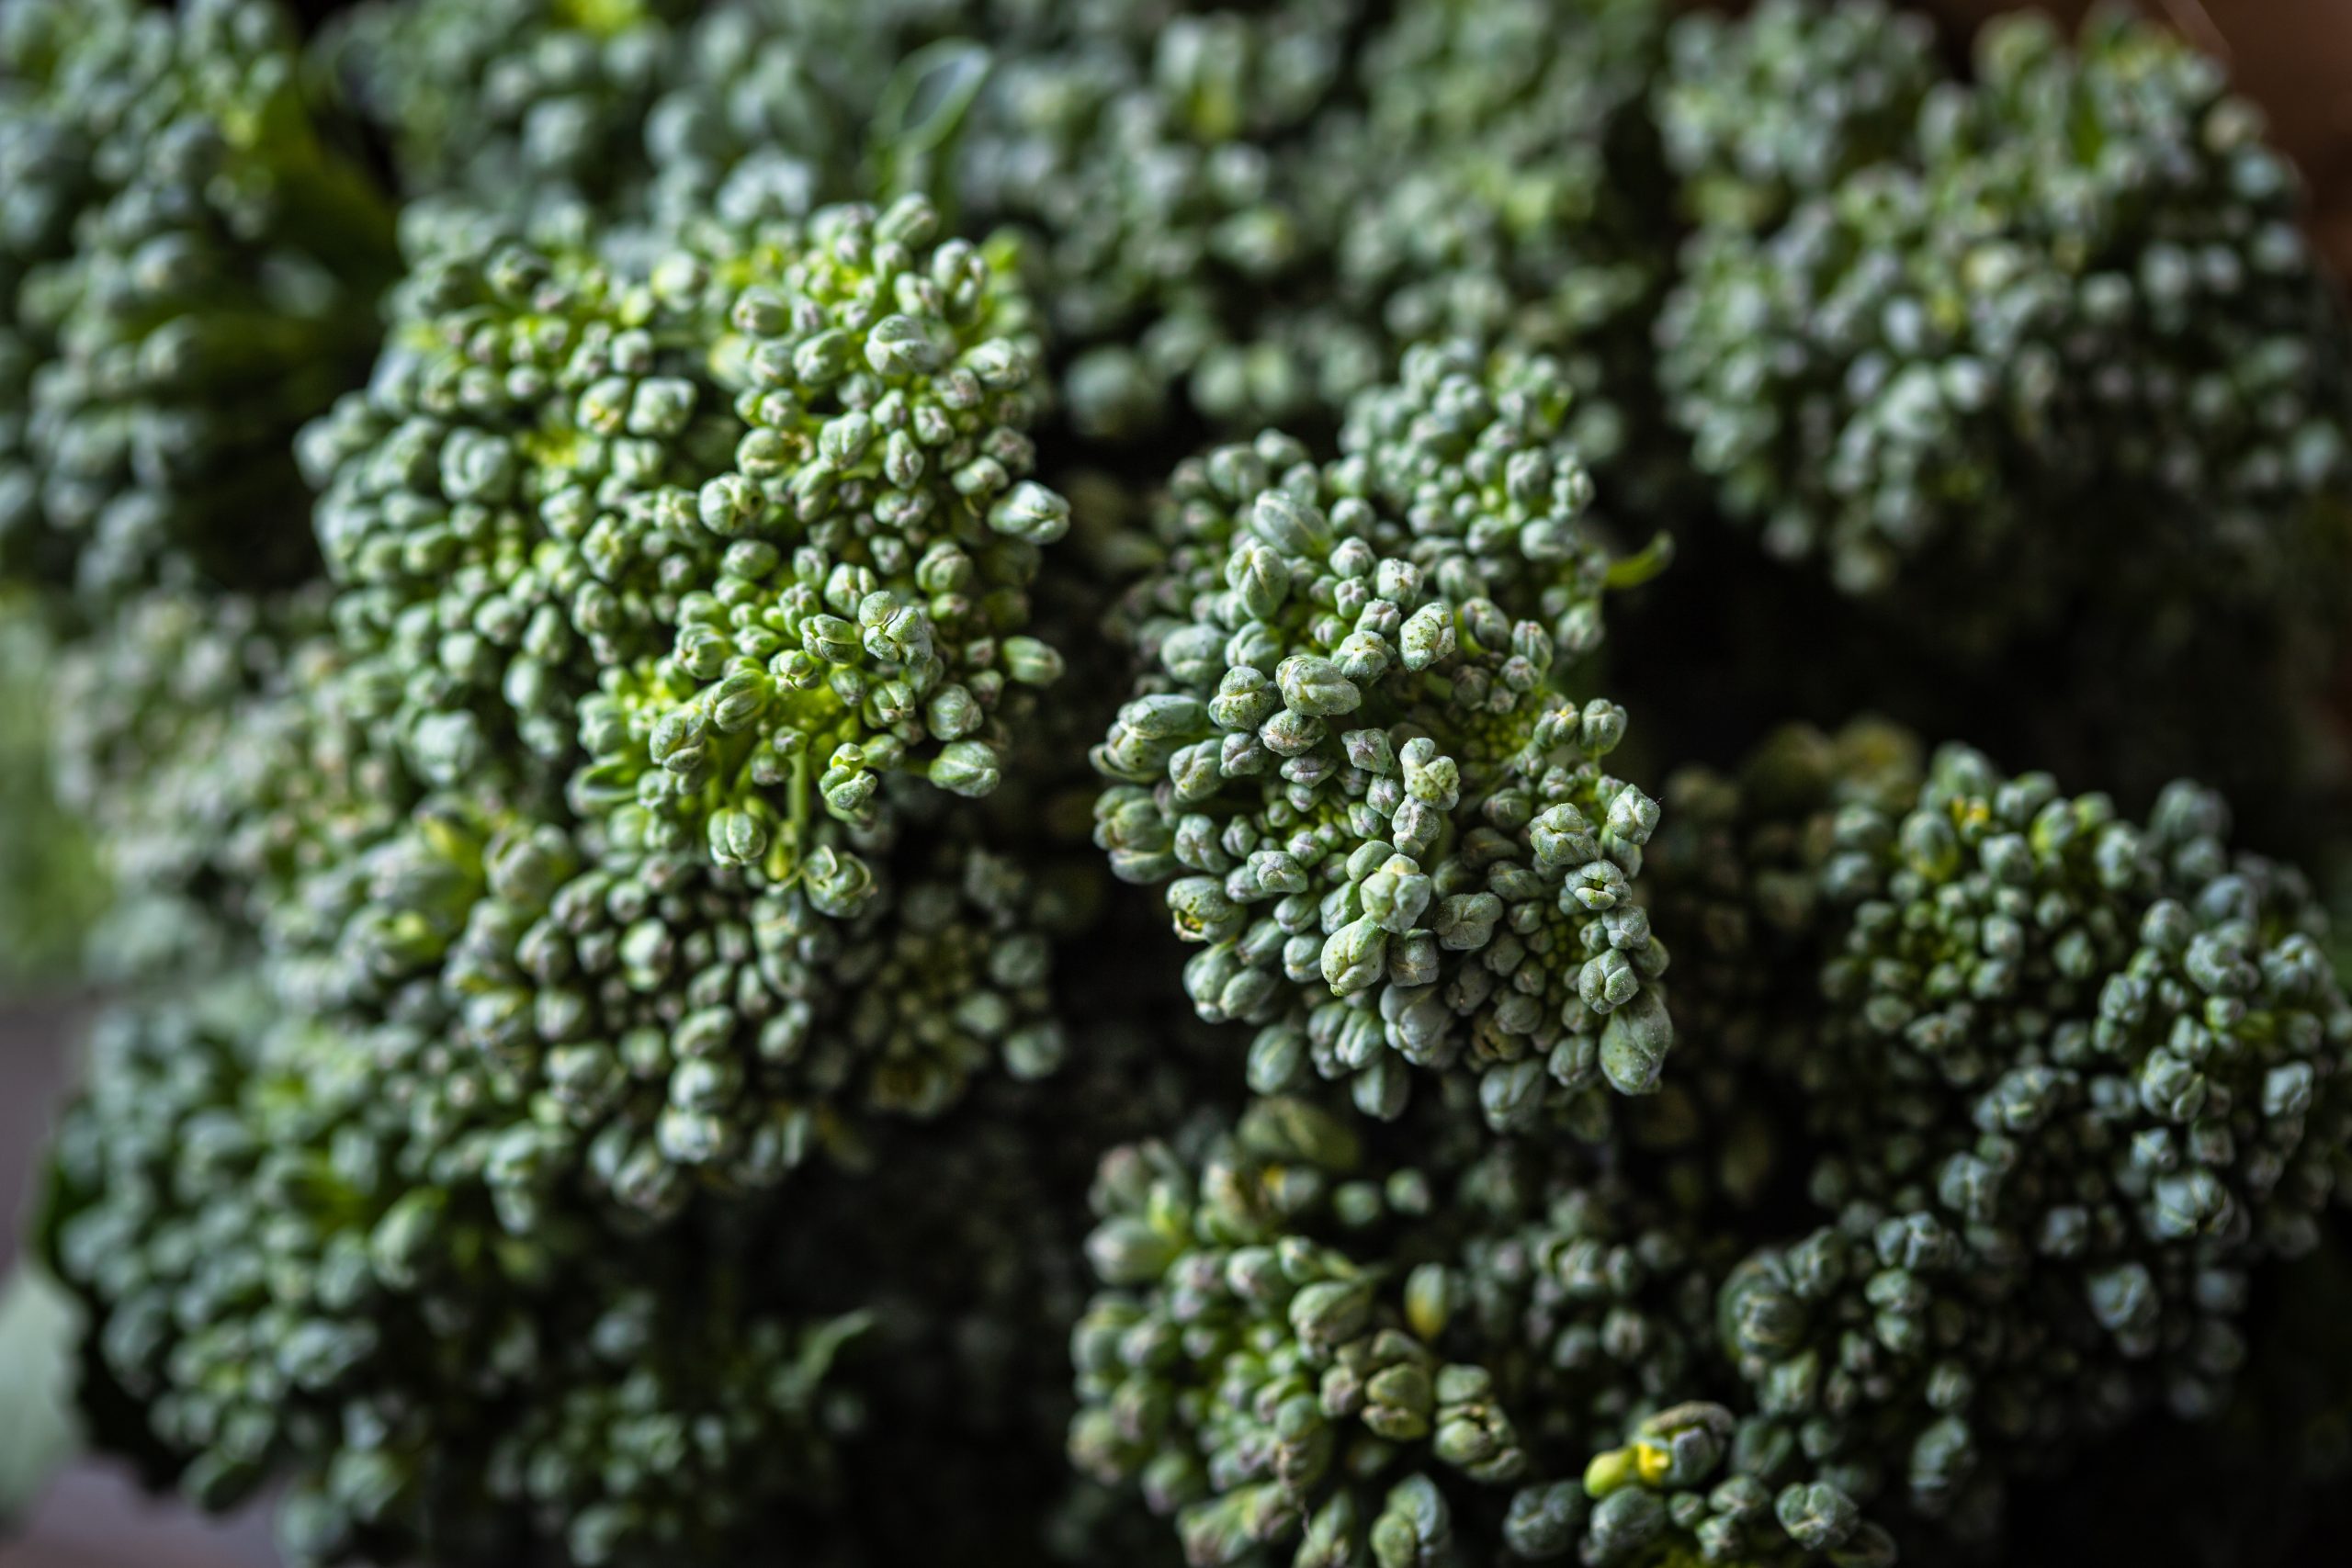 Develop novel integrated disease management strategies for delivering solutions to mitigate the impact of major broccolini diseases